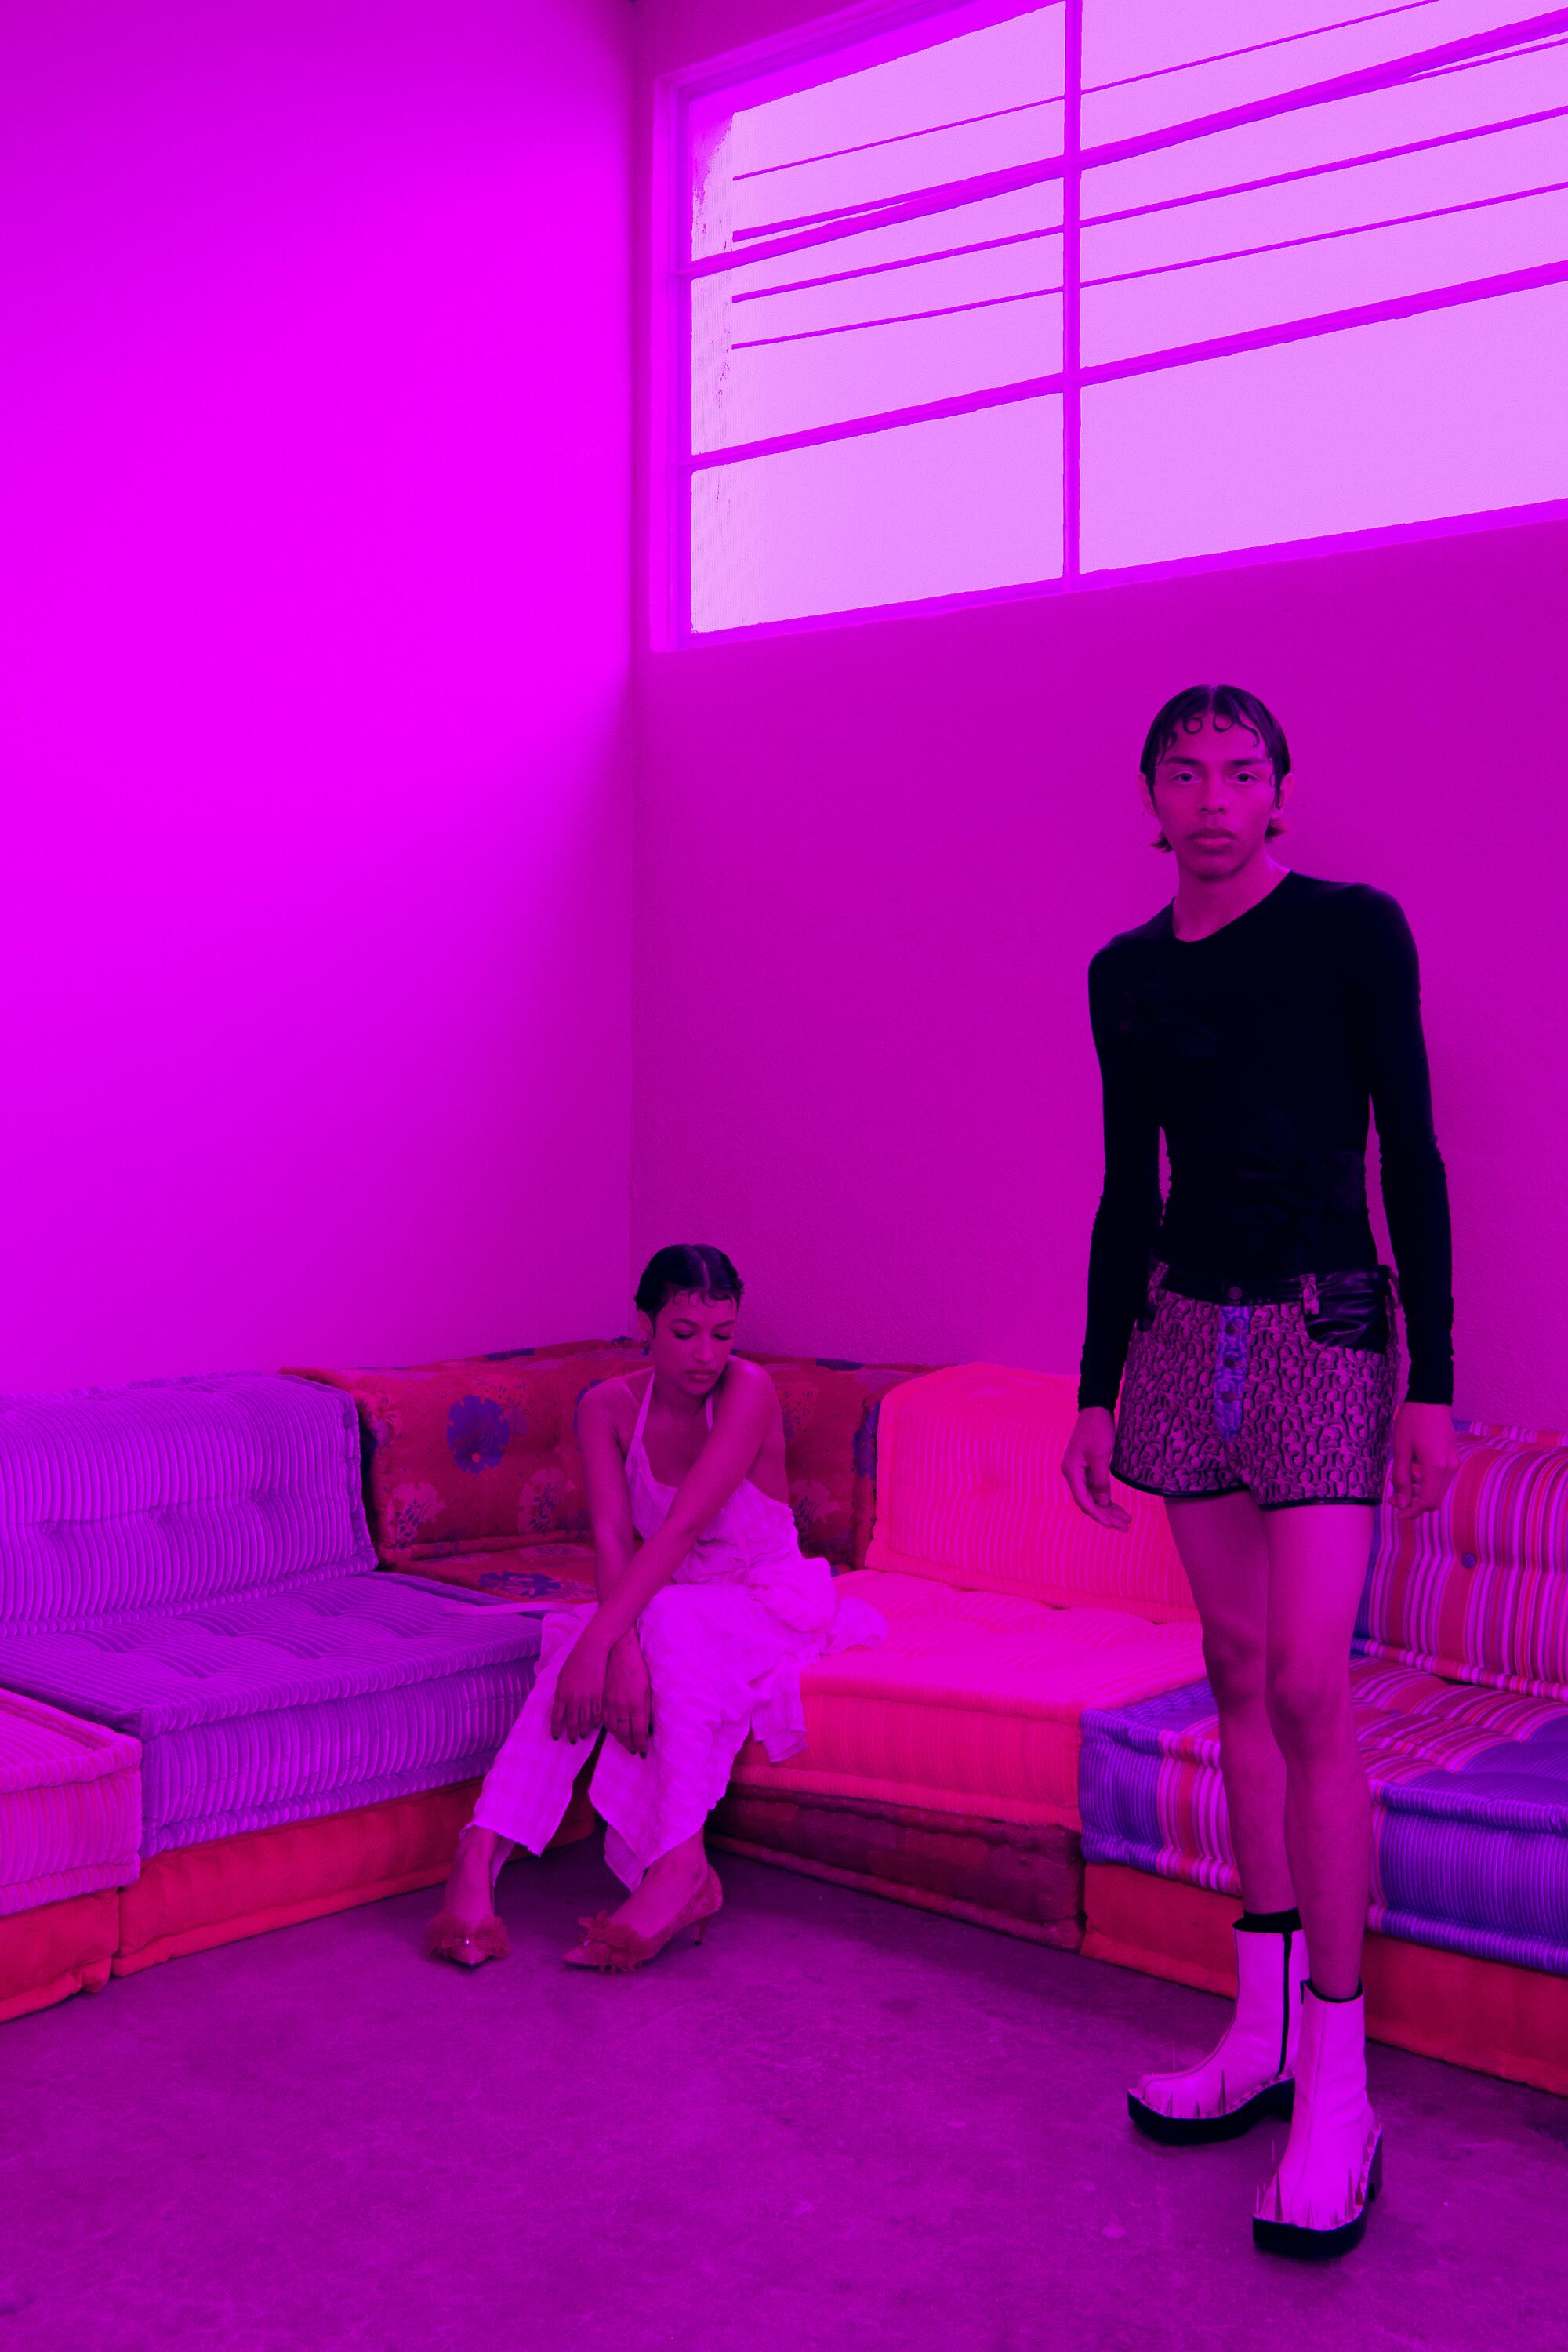 Two models bathed in a bright pink light, a colorful couch in the background.